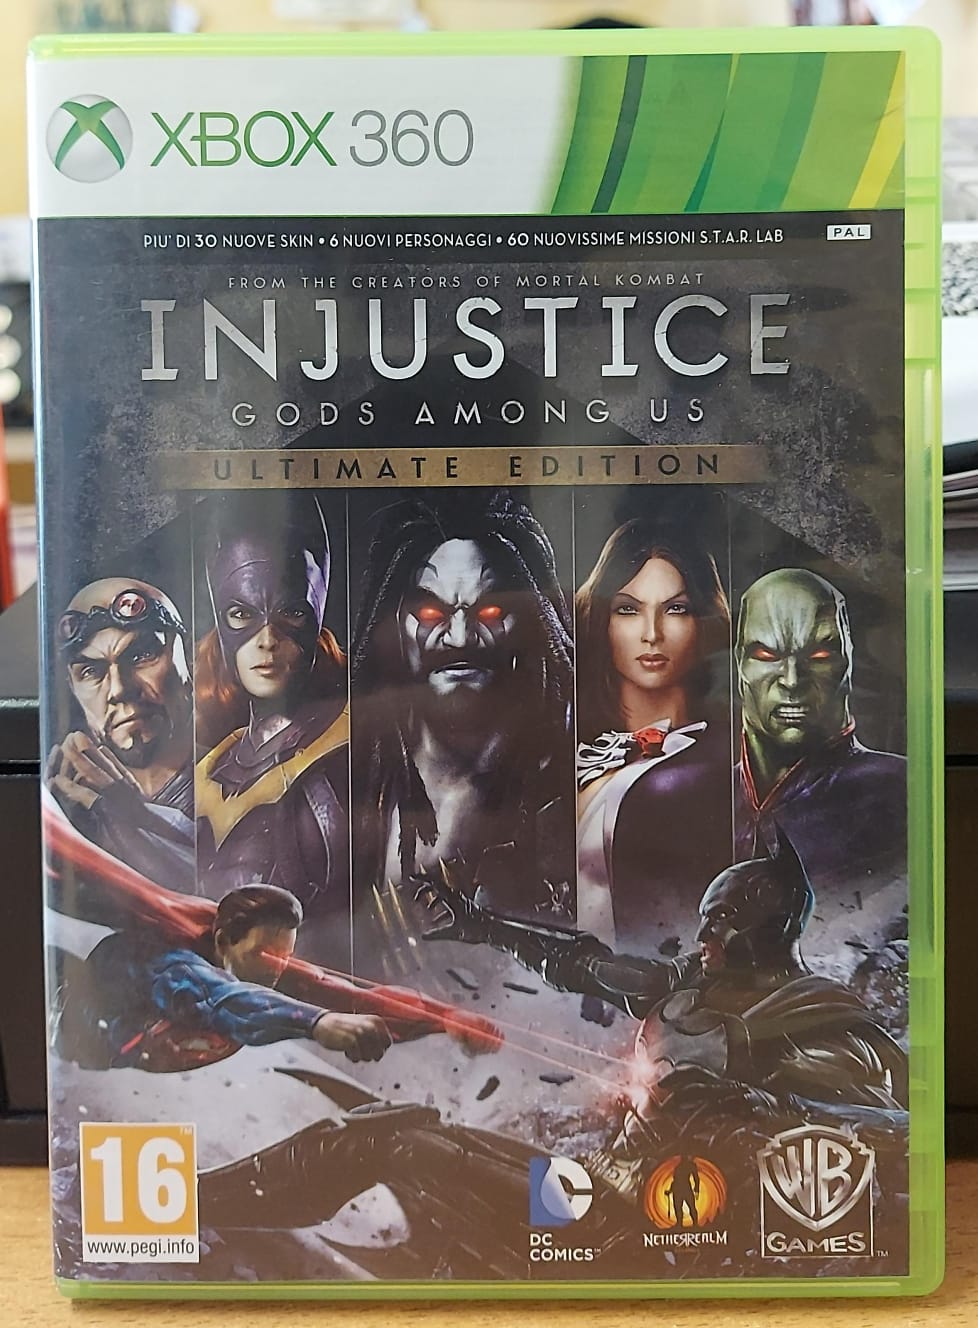 INJUSTICE GODS AMONG US ULTIMATE EDITION